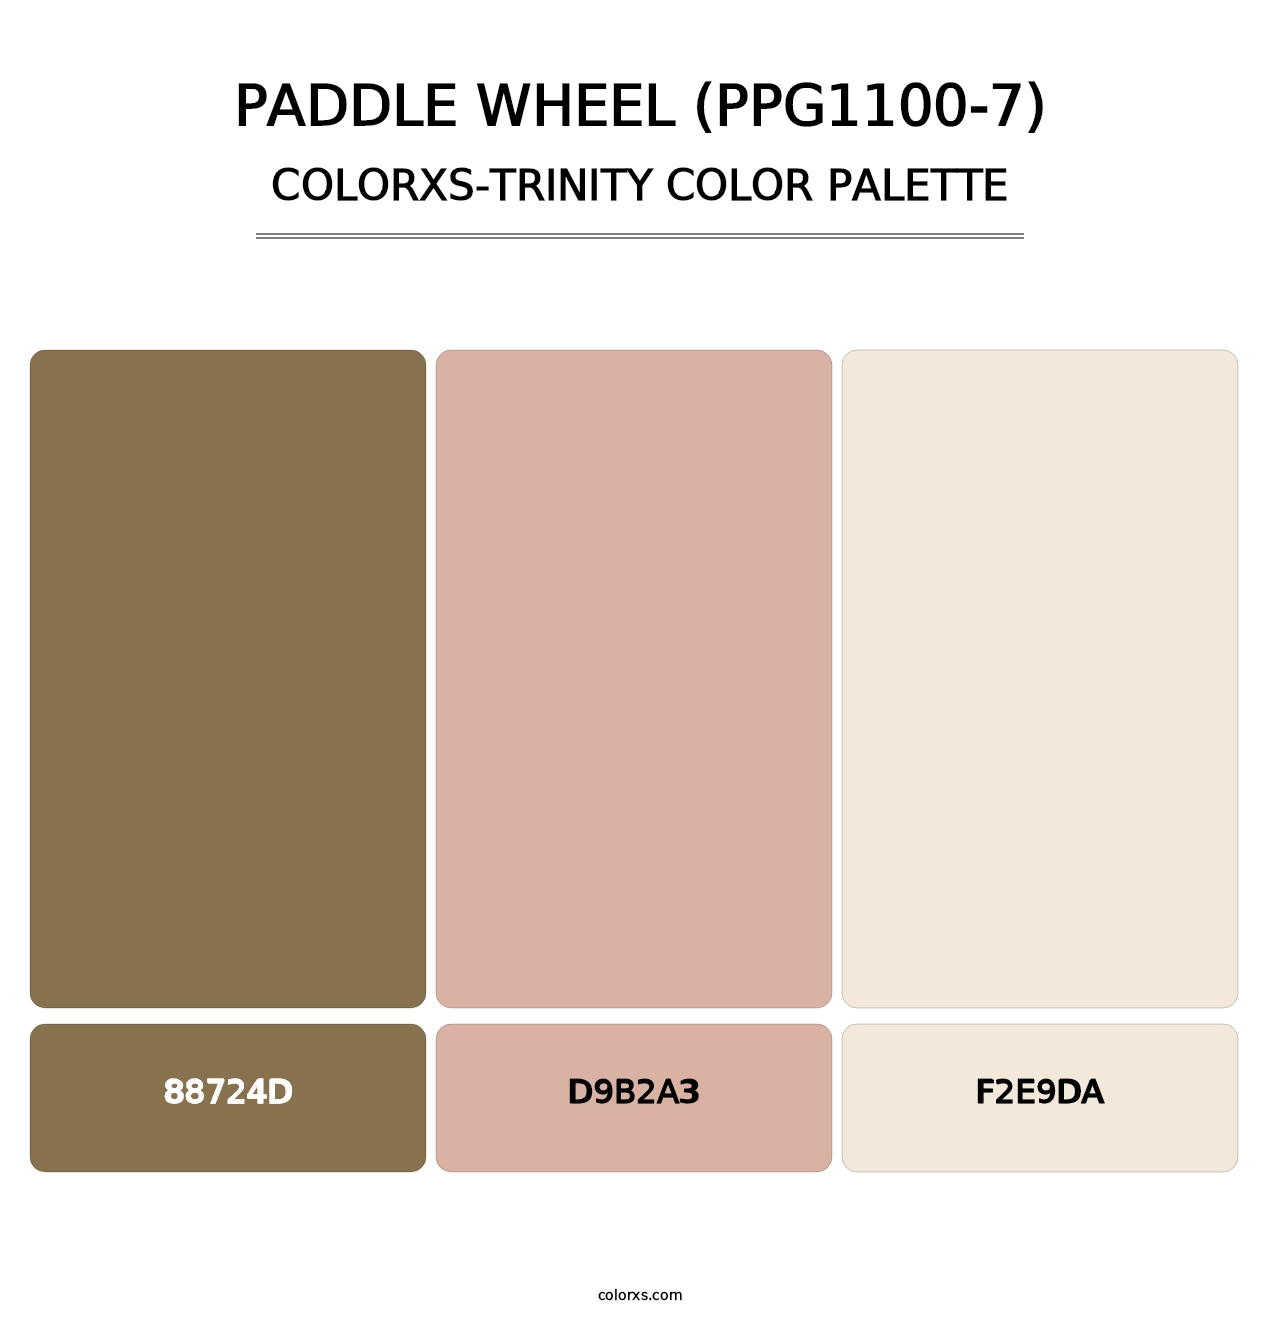 Paddle Wheel (PPG1100-7) - Colorxs Trinity Palette